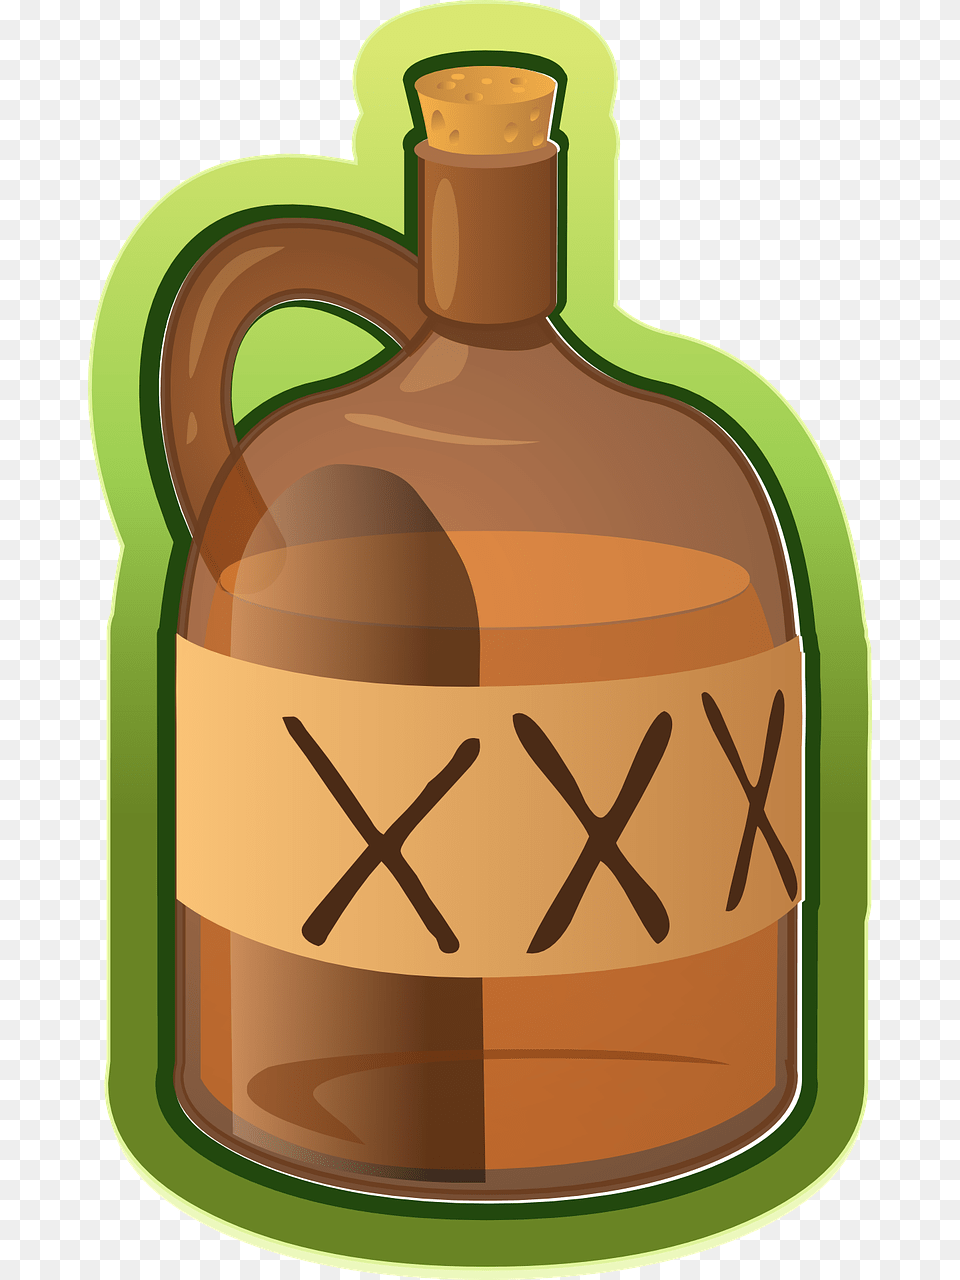 Glass Bottle Alcoholic Drink Fizzy Drinks Clip Art Alcohol Xxx, Jug Free Png Download